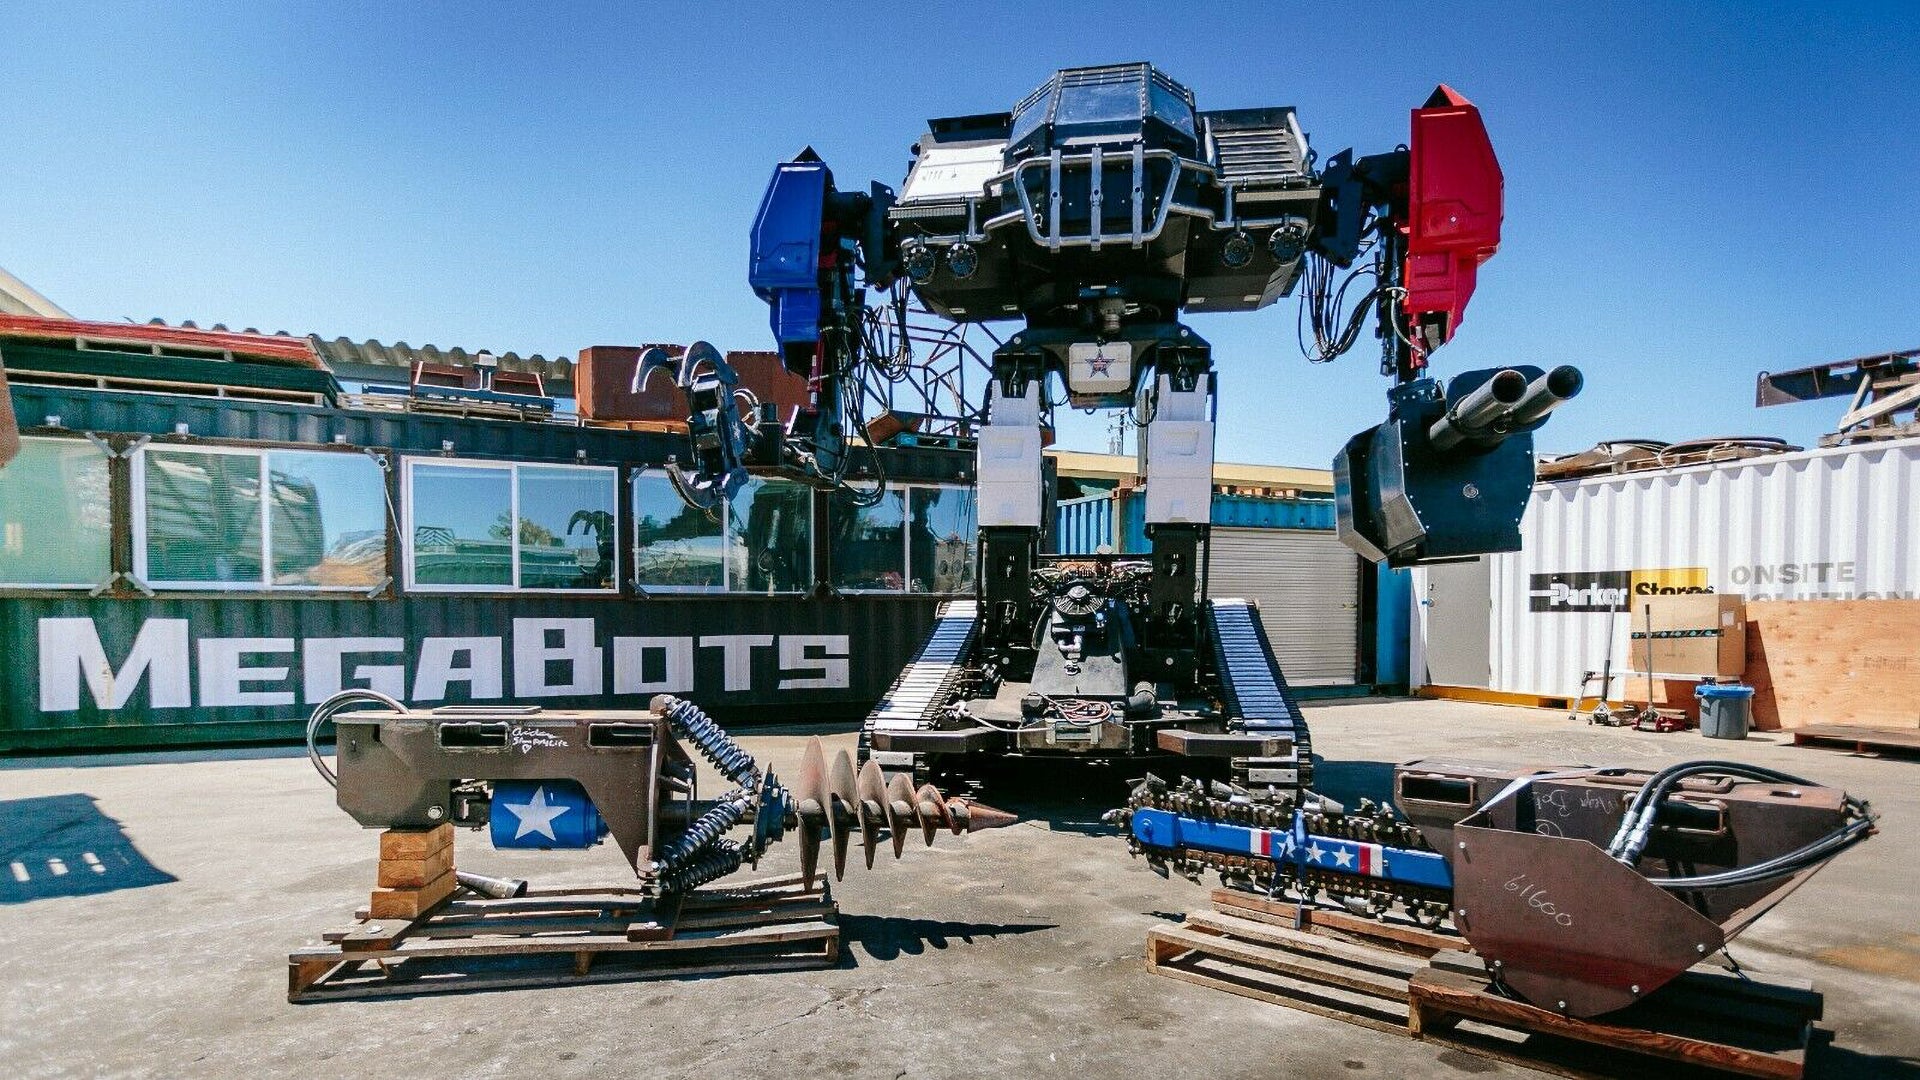 A Fully Operational Battle Robot Powered by a Corvette V-8 Engine